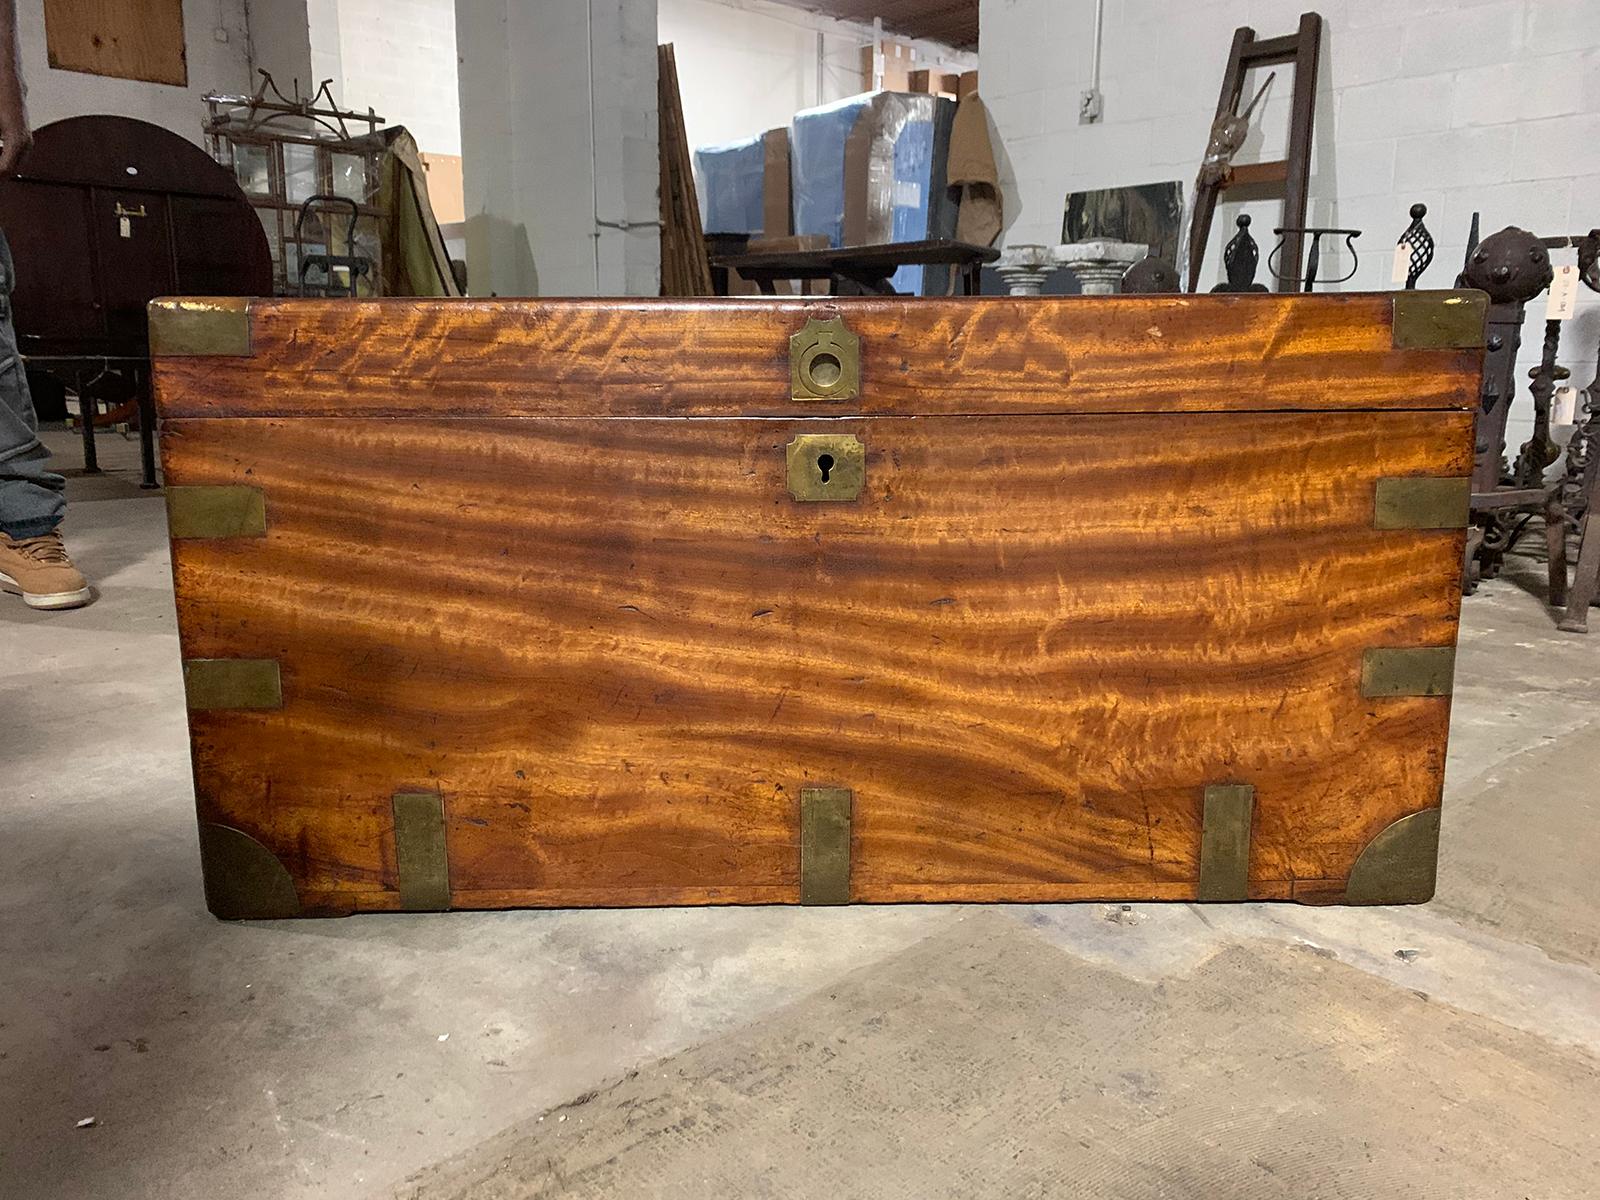 Campaign style camphor wood trunk with label & date, circa 1820.